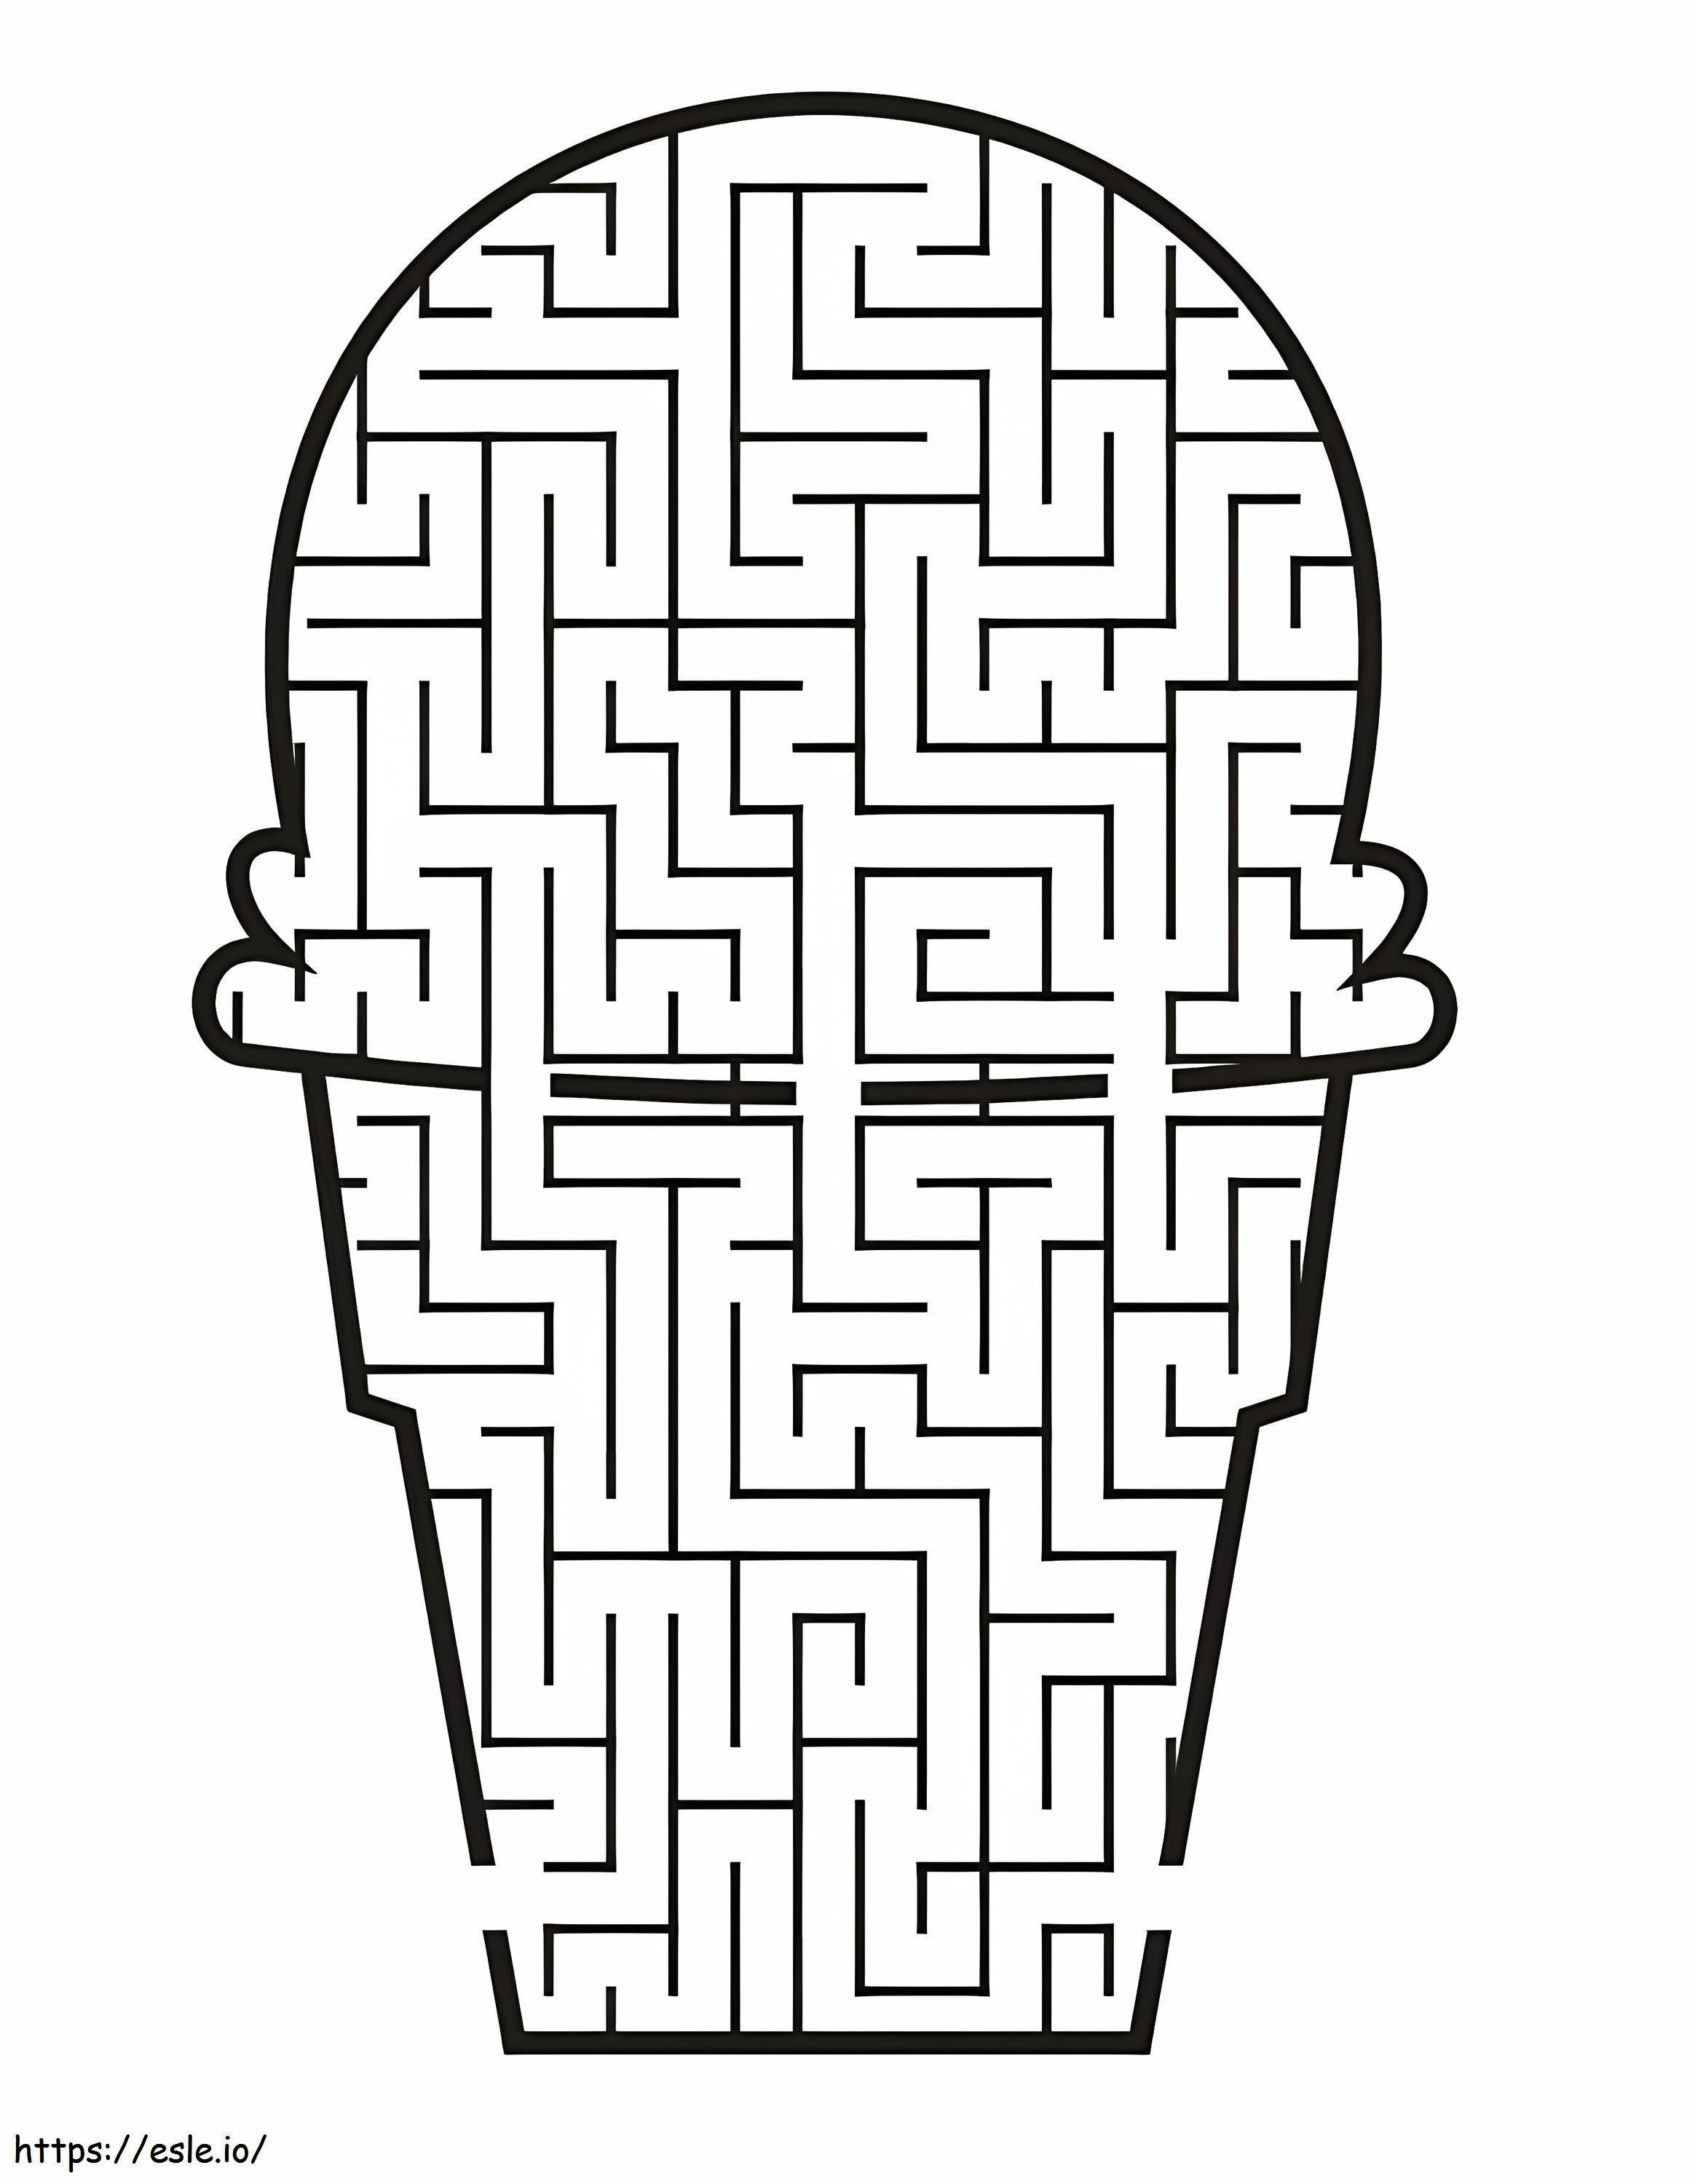 Ice Cream Maze coloring page